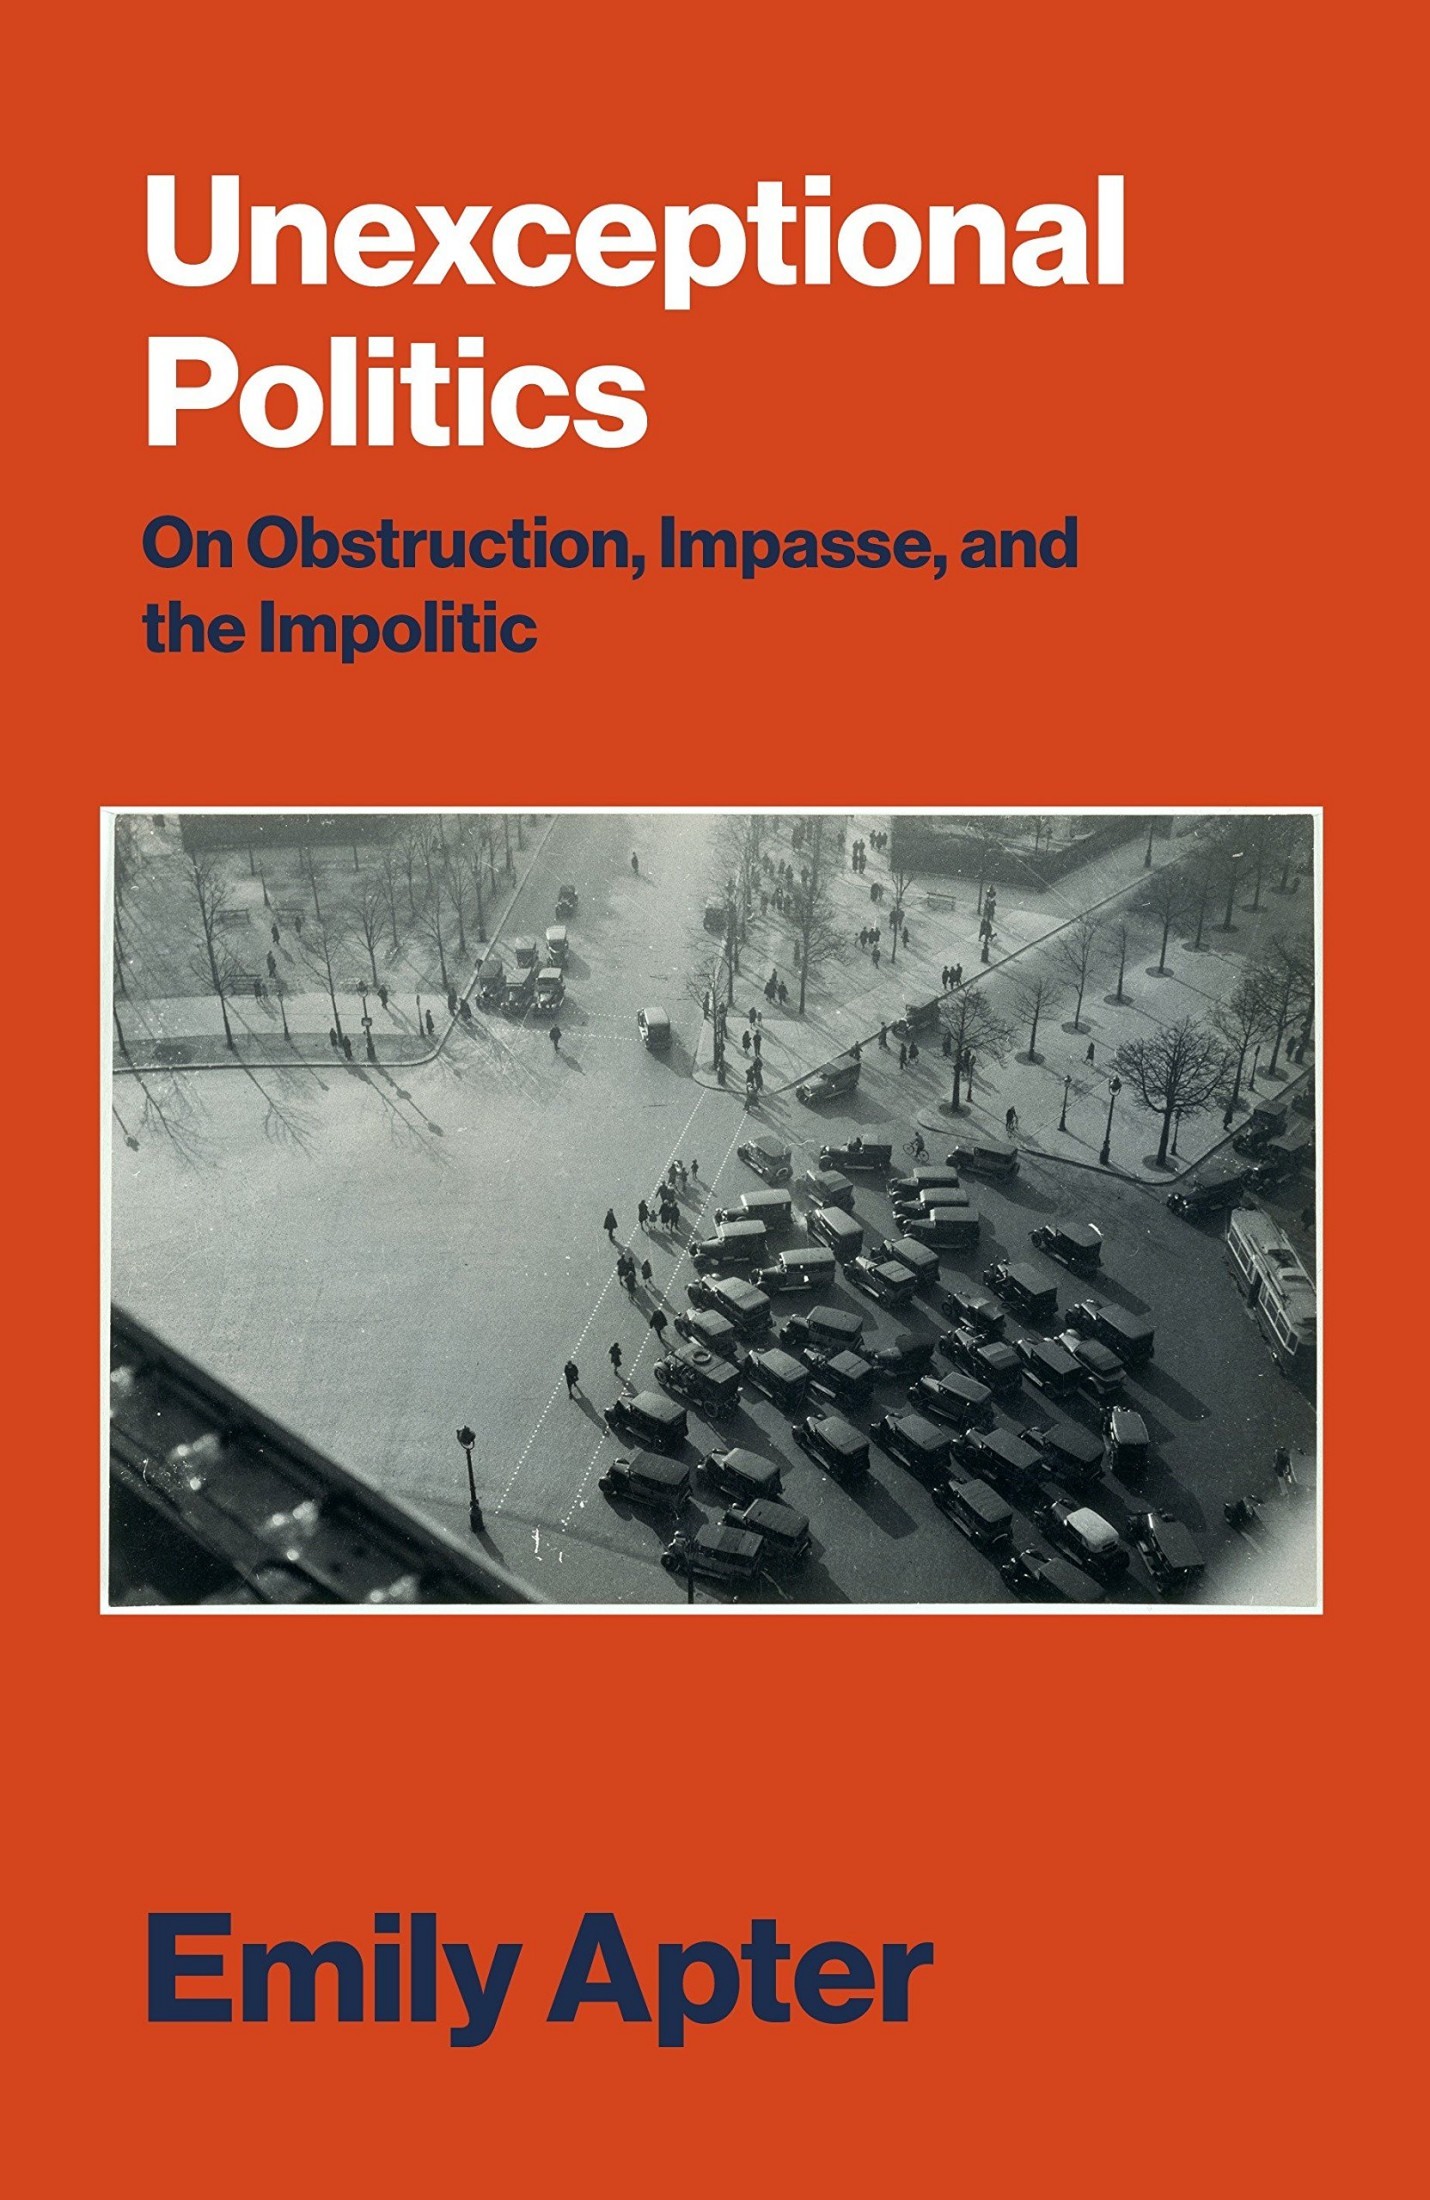 Unexceptional Politics: On Obstruction, Impasse, and the Impolitic